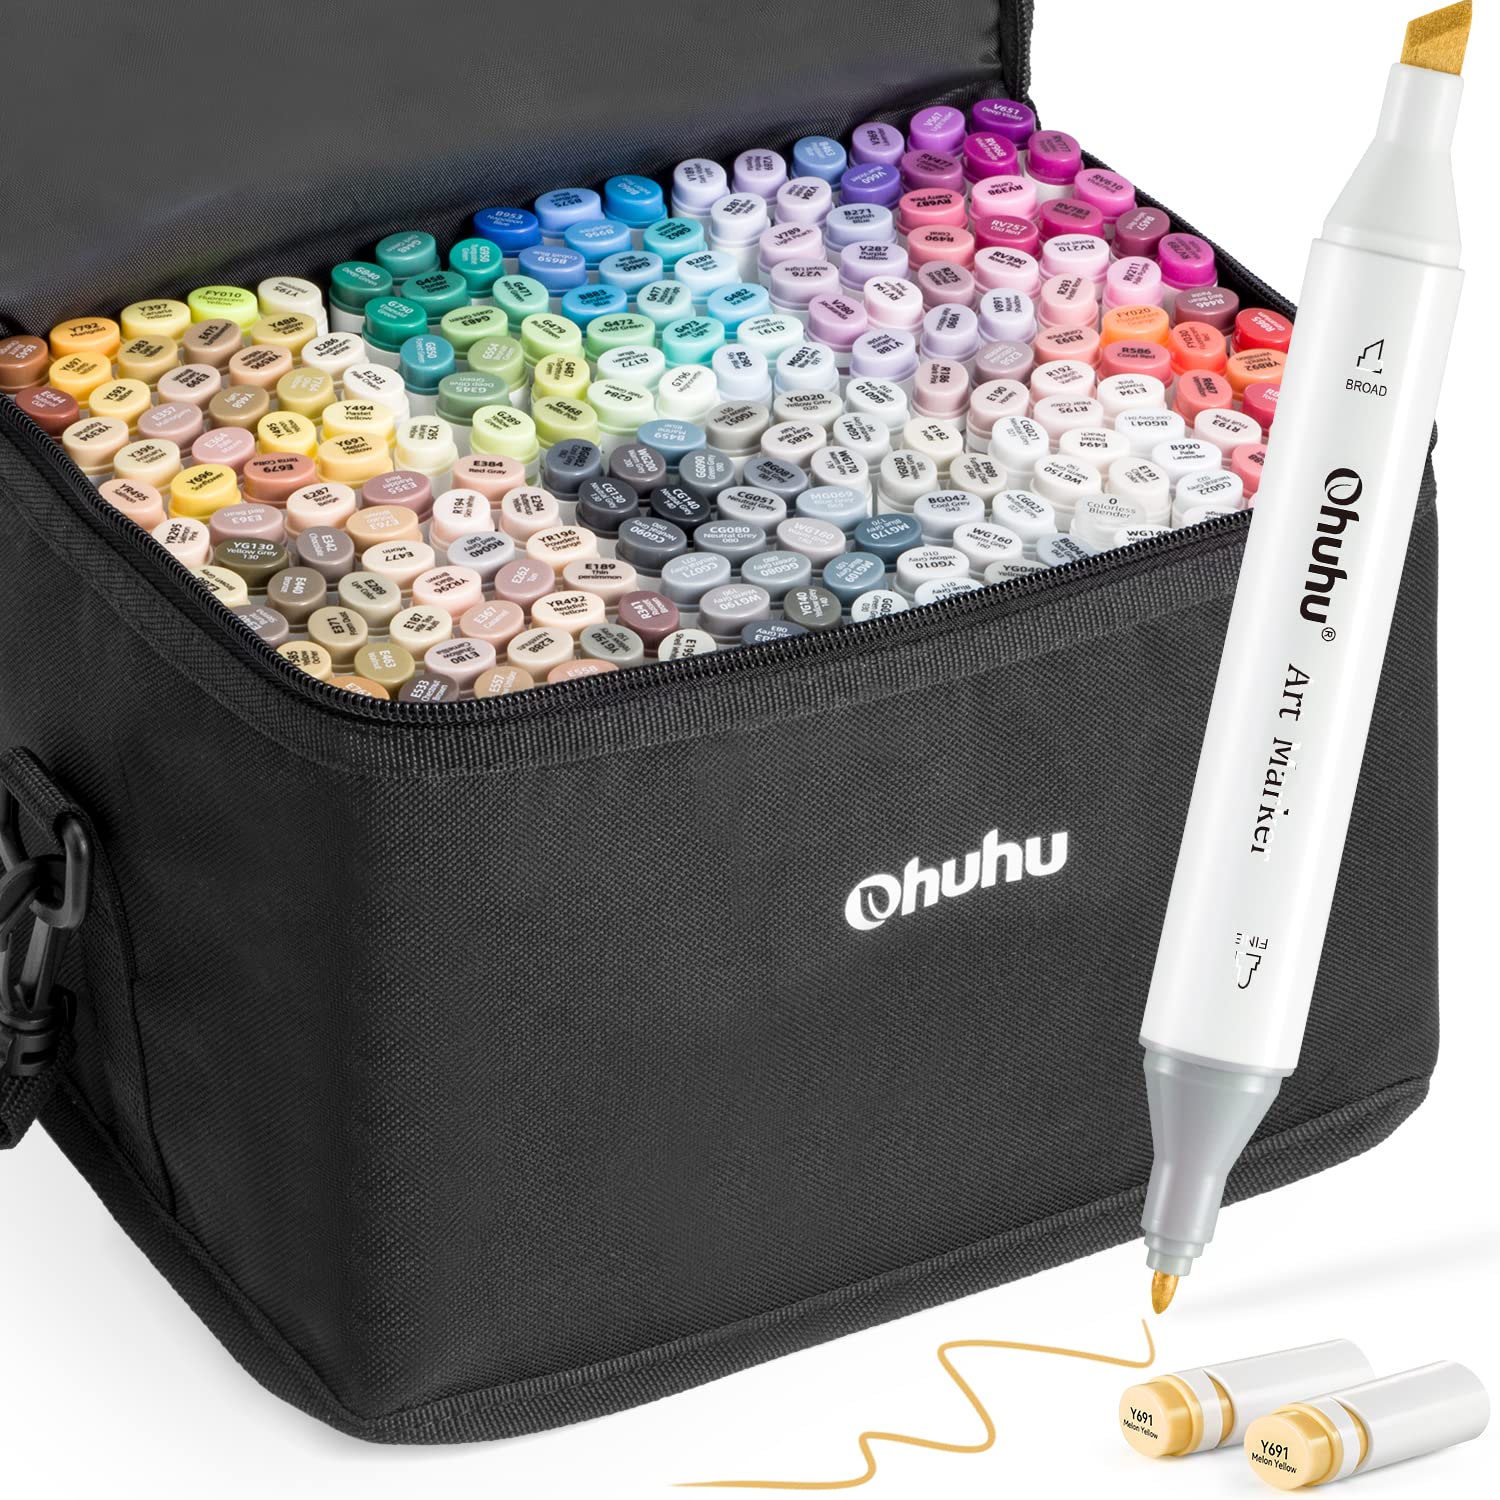 Alcohol-based Sketch Markers for Drawing Sketching Great Christmas Gift Idea Ohuhu Double Tipped Marker Set for Kids Adults Coloring 160 Colors Alcohol Art Markers Bonus 1 Colorless Marker Blender 